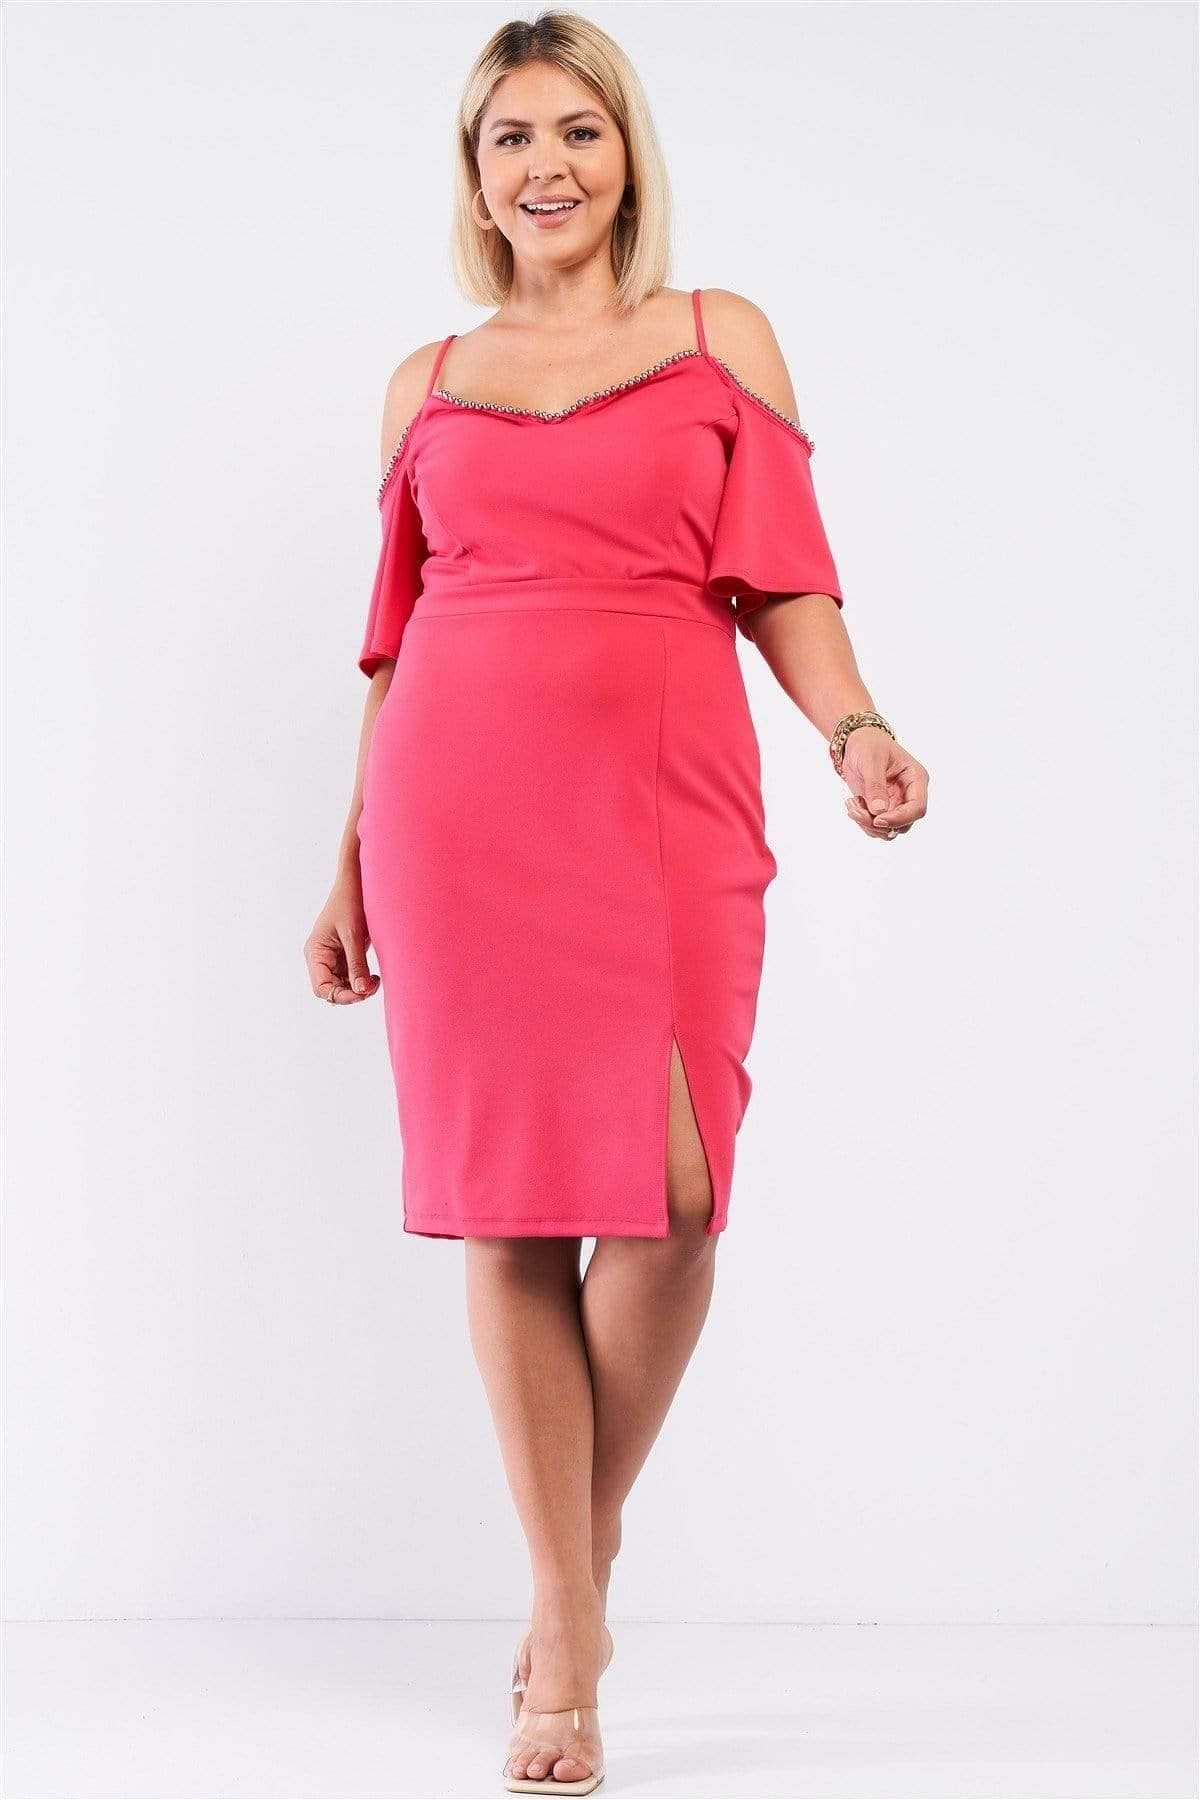 Coral 3/4 Sleeve Plus Size Off The Shoulder Midi Dress - Shopping Therapy, LLC Dress